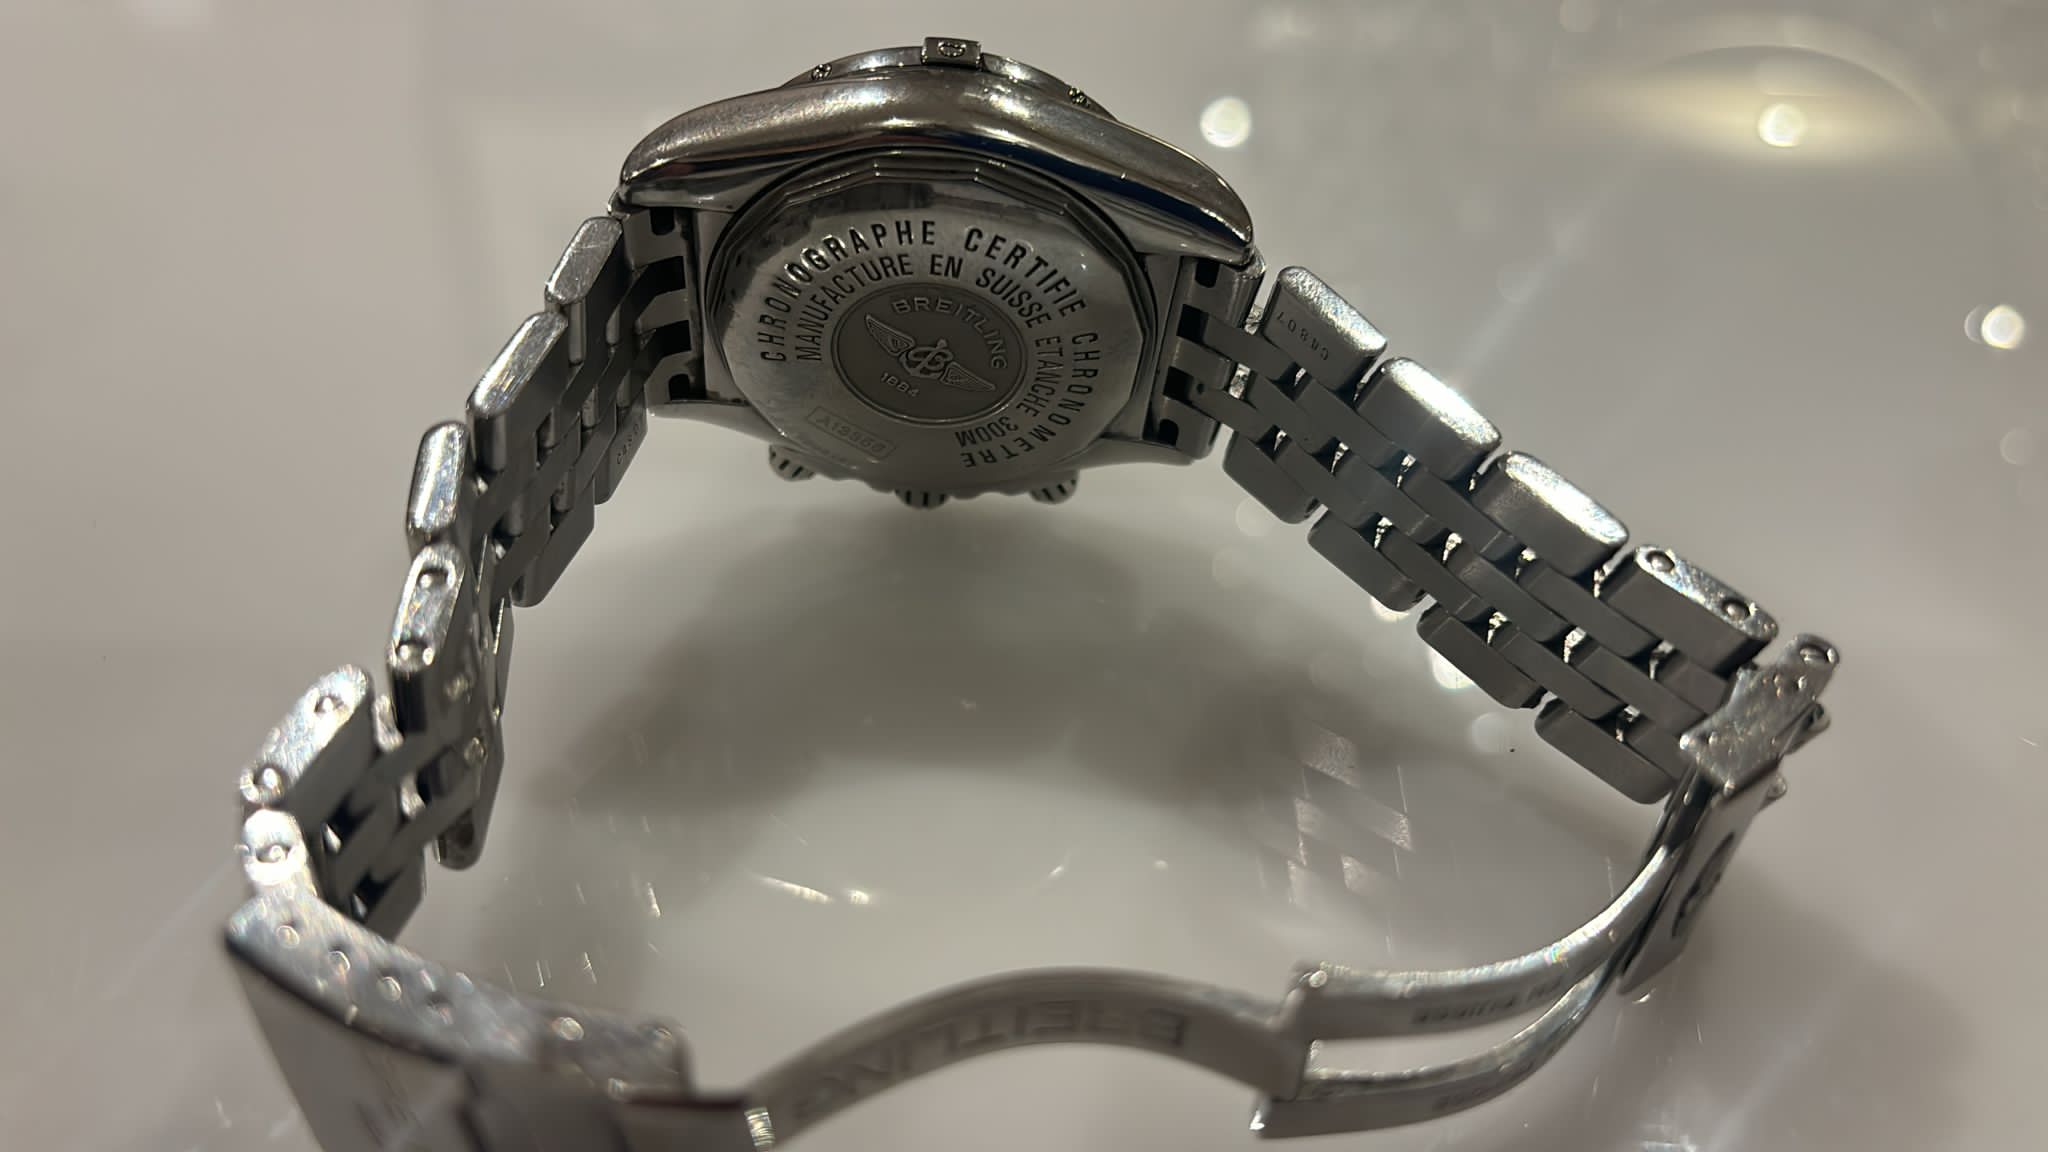 Breitling Chronomat Evolution A13356 Watch - Image 11 of 12